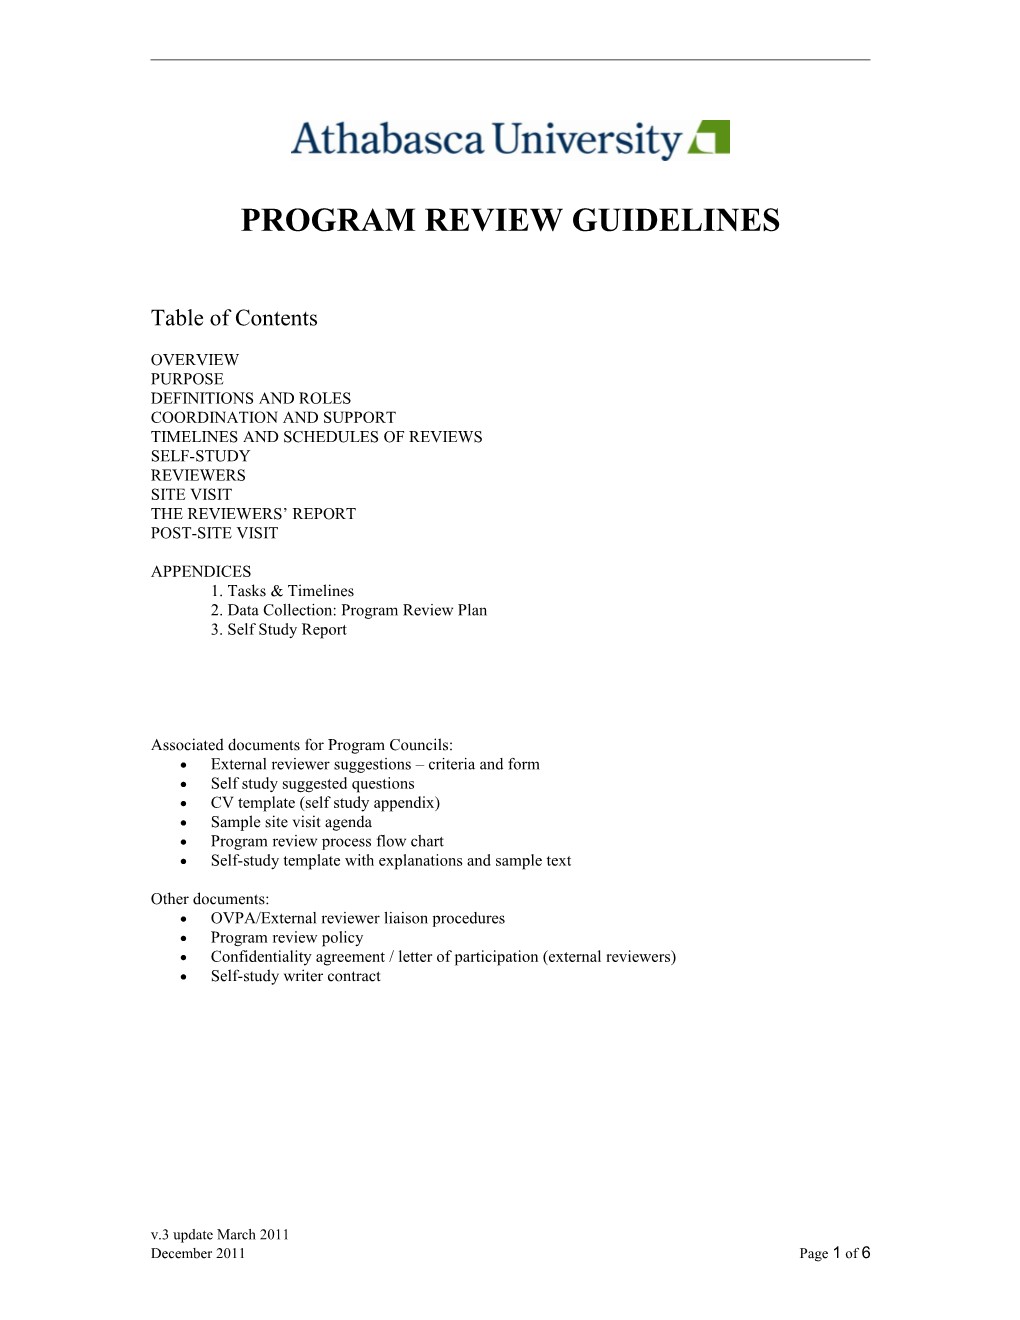 Program Review Guidelines